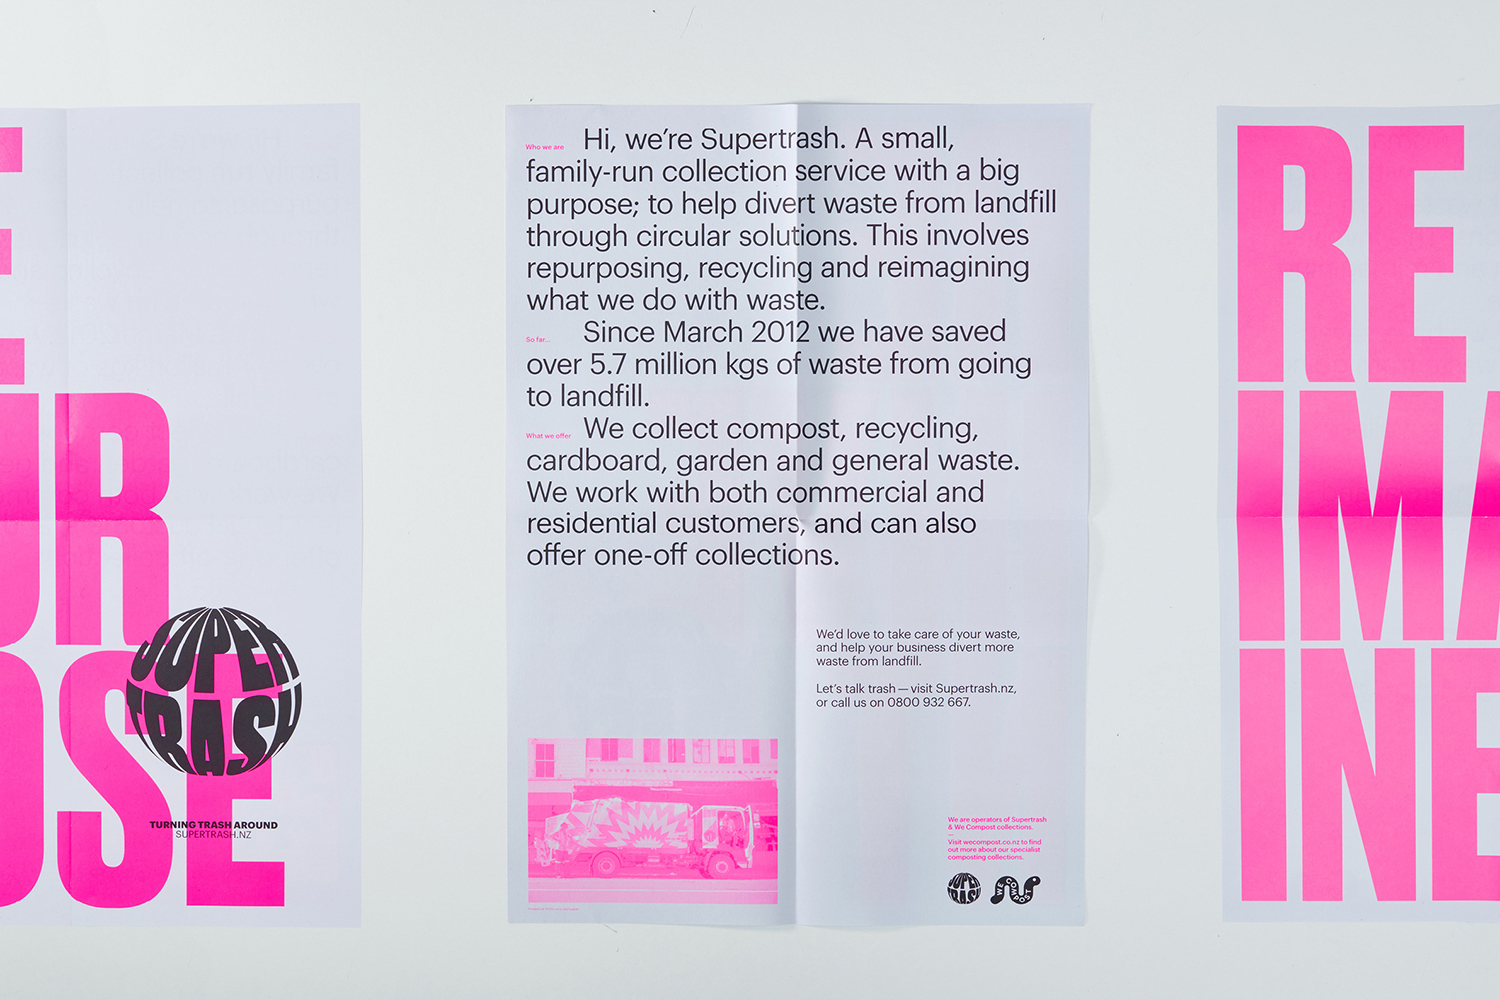 Logo design and mailer by Seachange for refuse collection and reuse company Supertrash